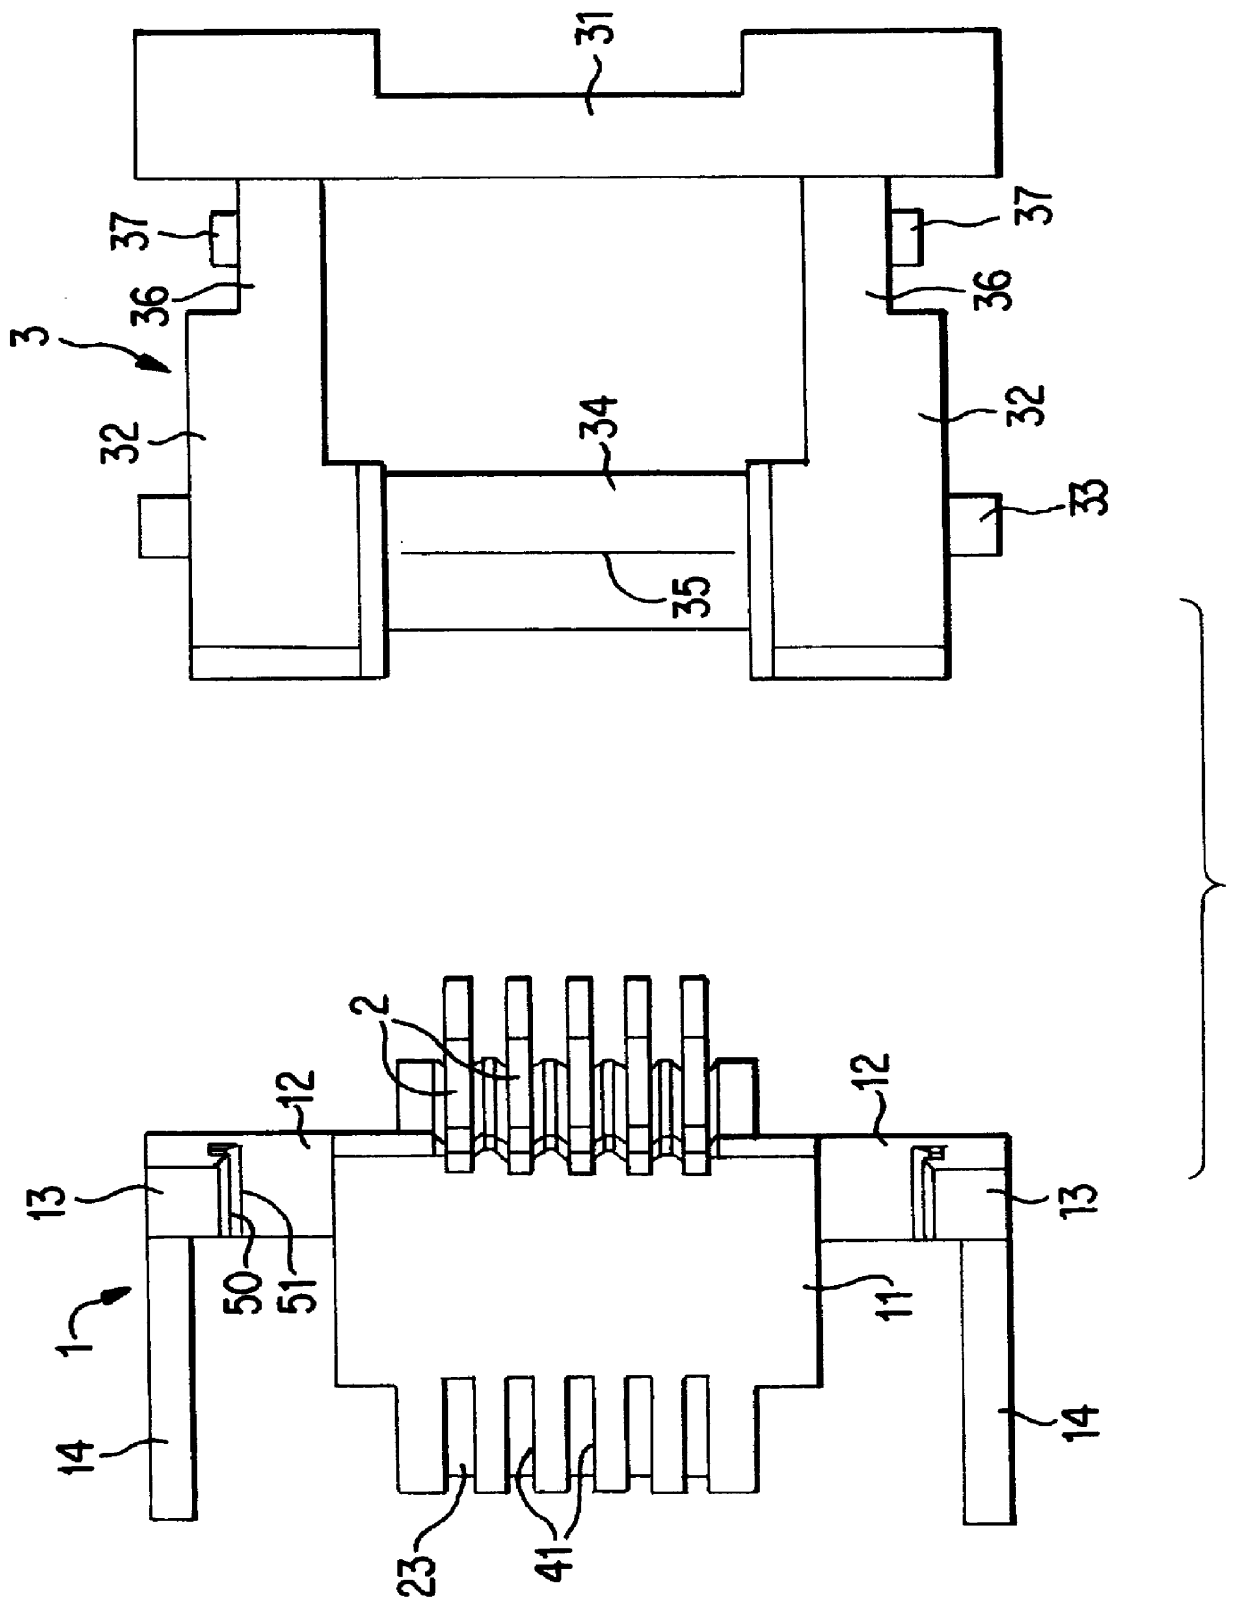 Connector for flat conductive path